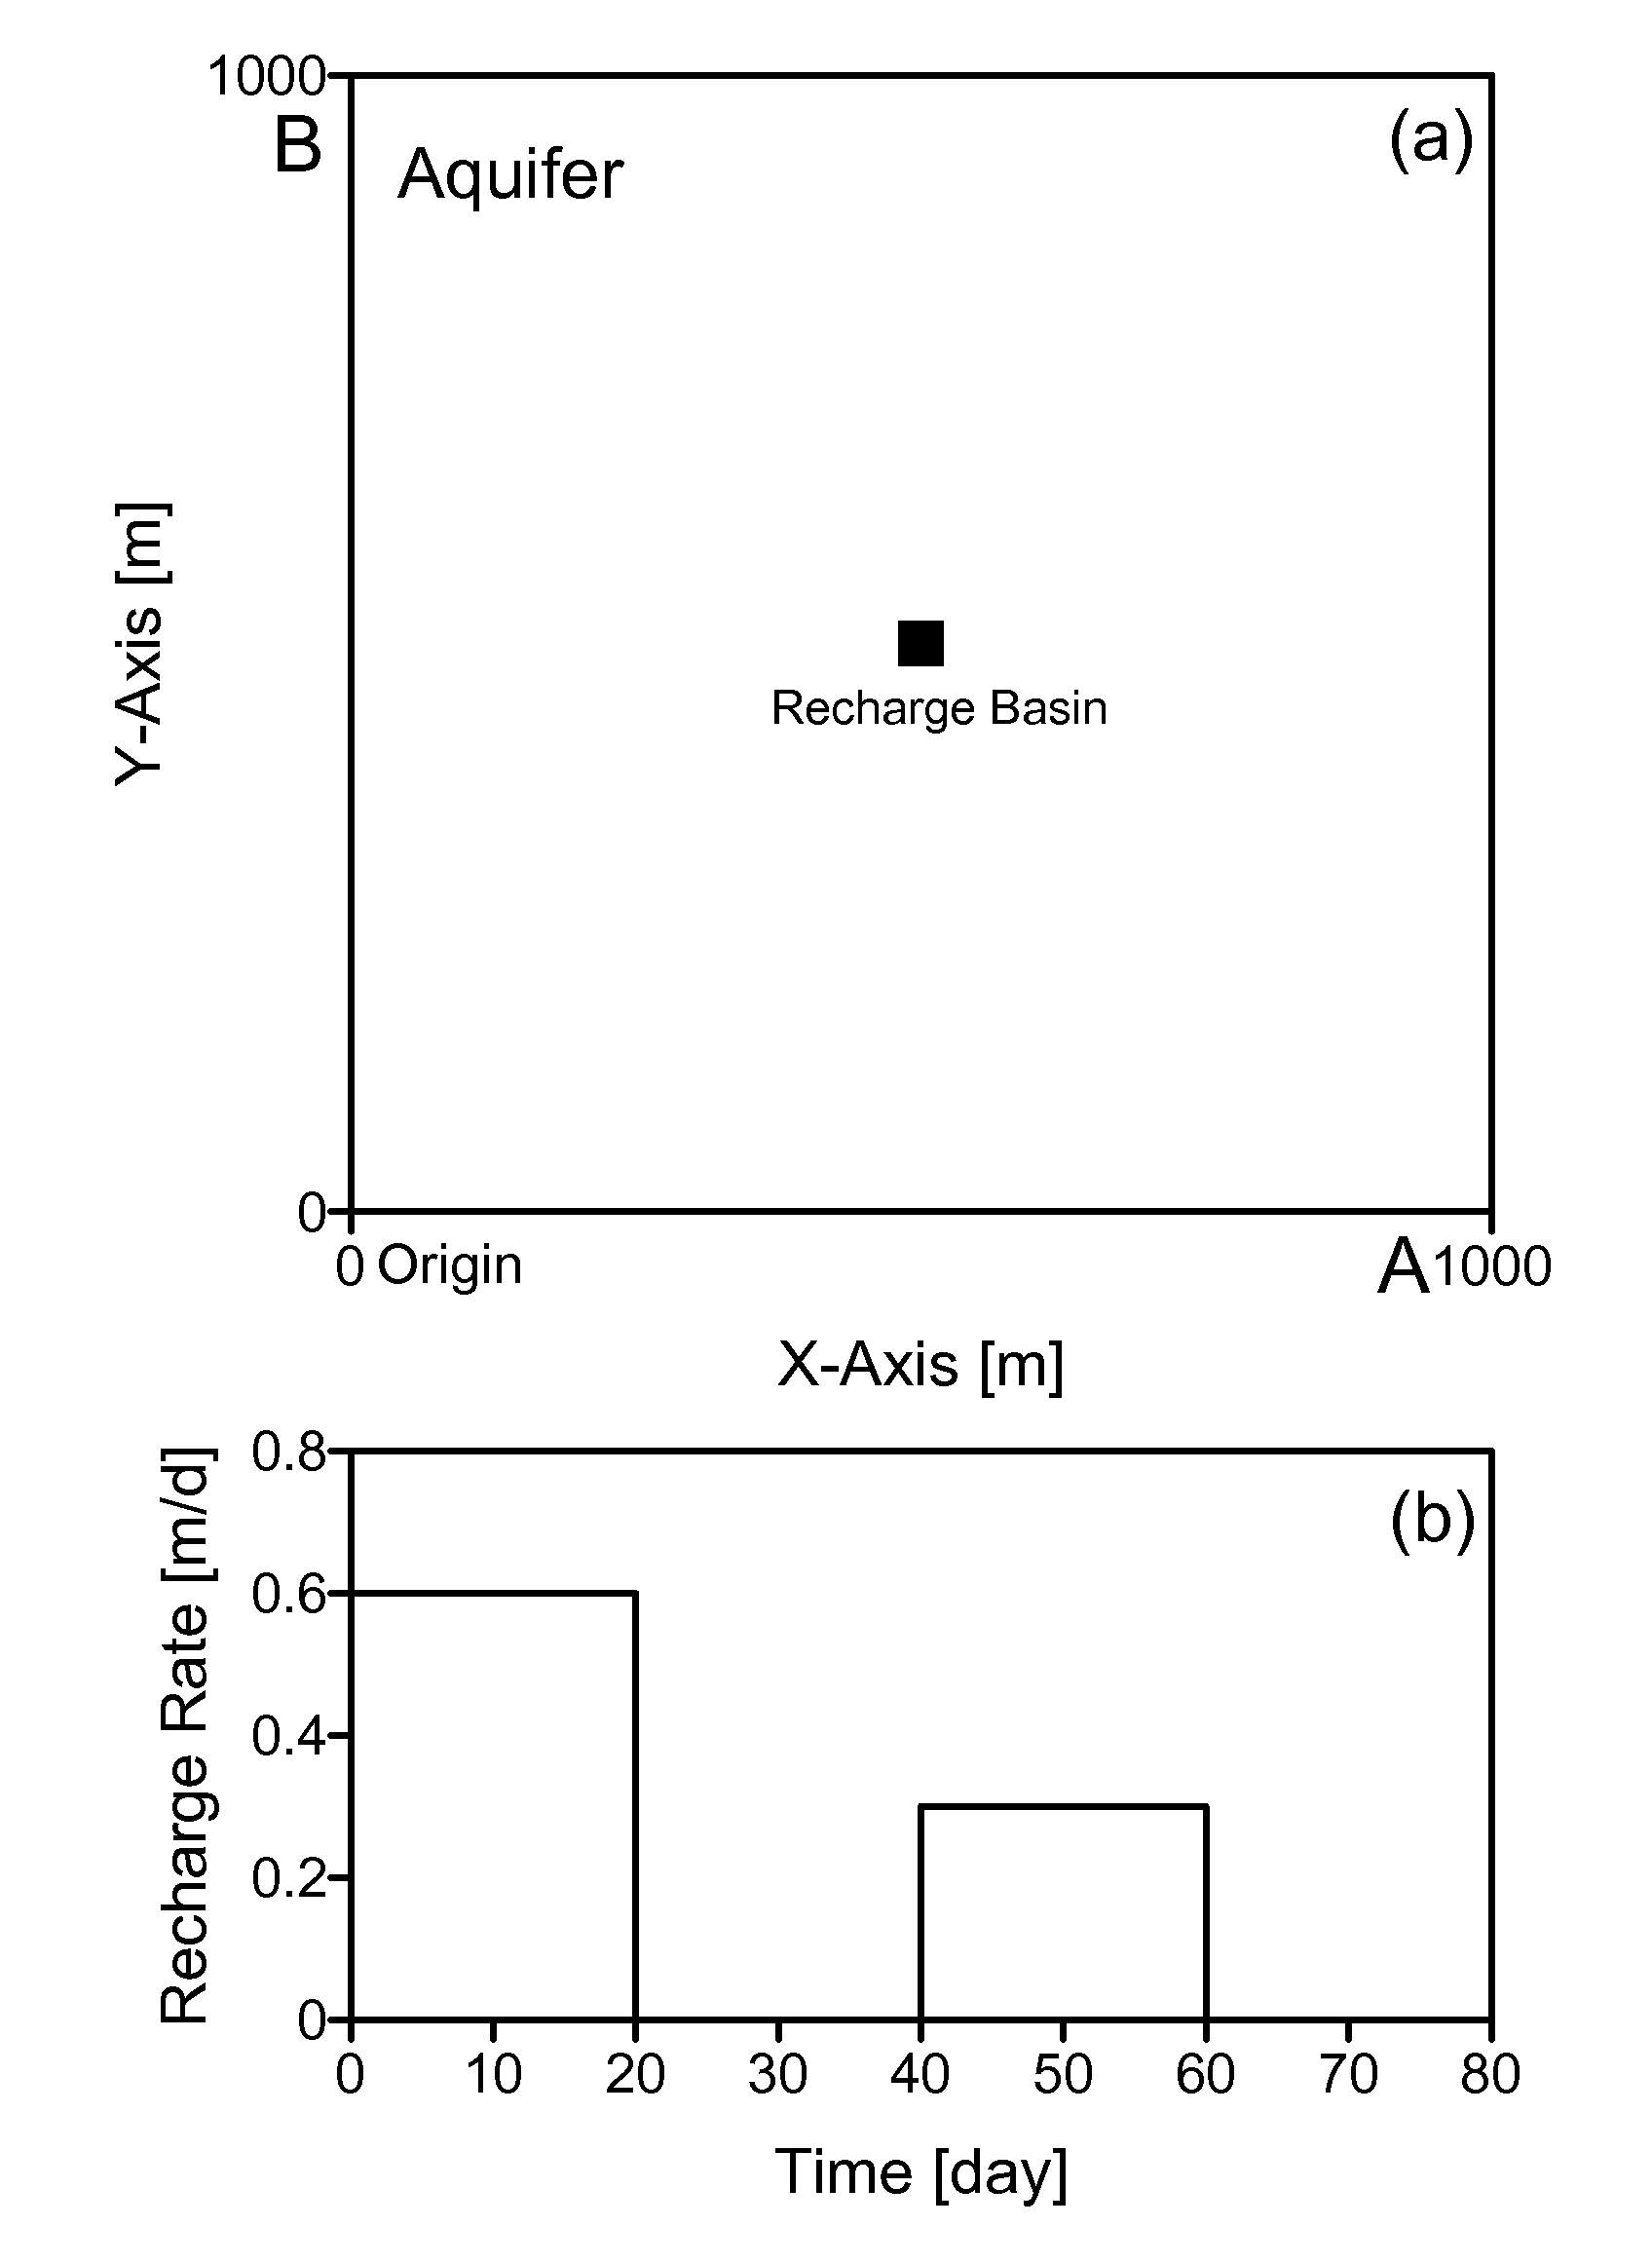 Method of predicting the dynamic behavior of water table in an anisotropic unconfined aquifer having a general time-varying recharge rate from multiple rectangular recharge basins